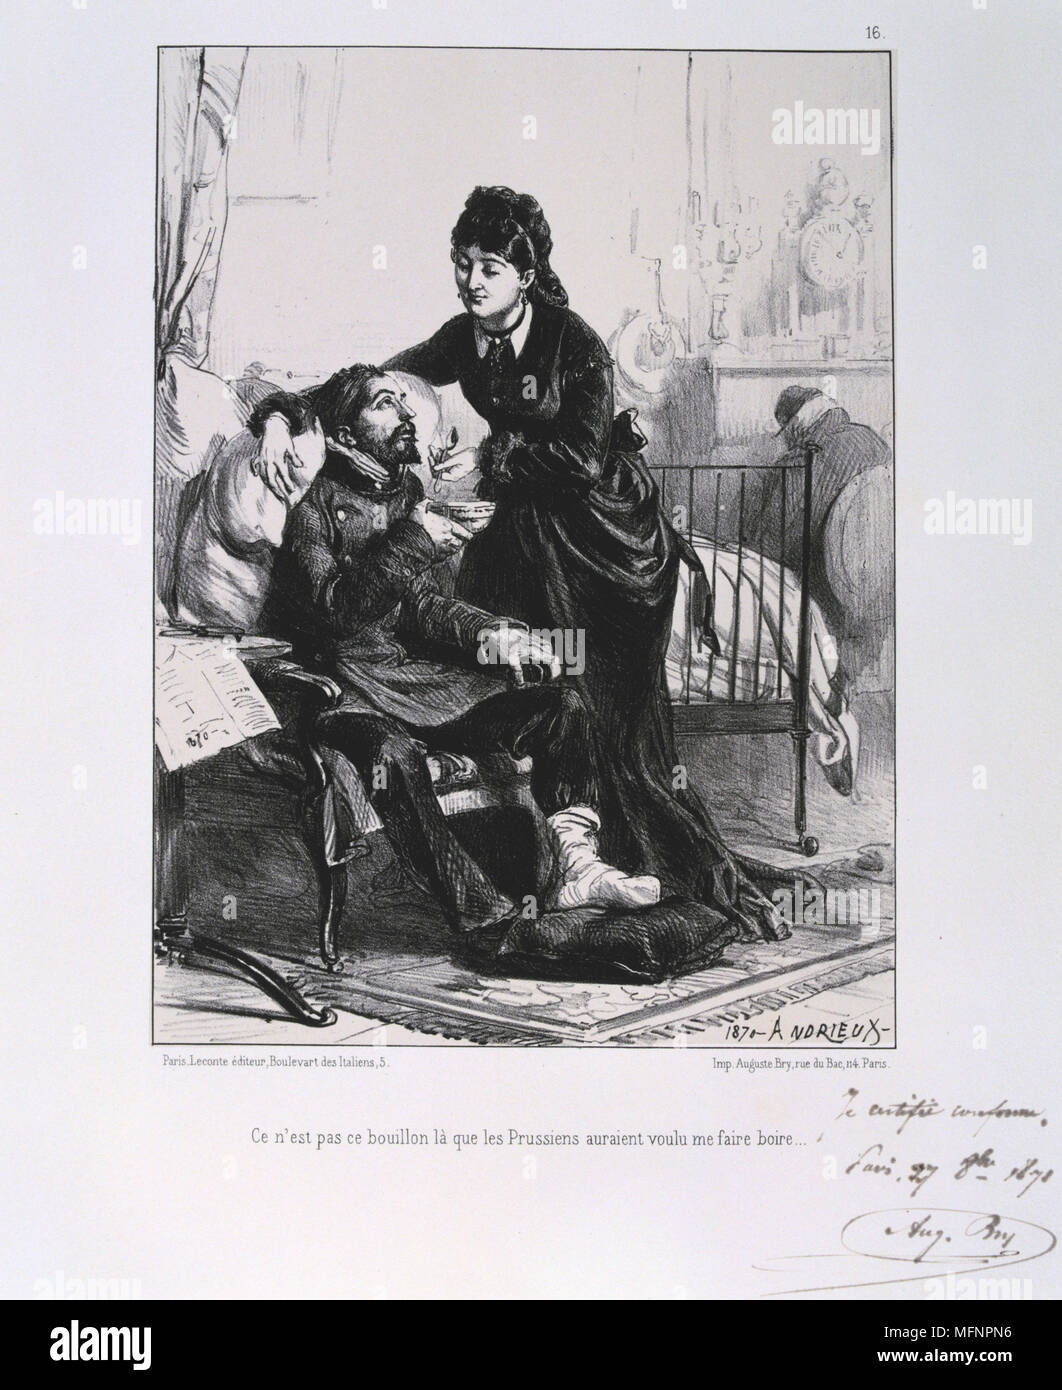 Franco-Prussian War 1870-1871: A wounded soldier being nursed and nourished. From a series of lithographs  by Clement August Andrieux on the Gardes Nationales. Stock Photo